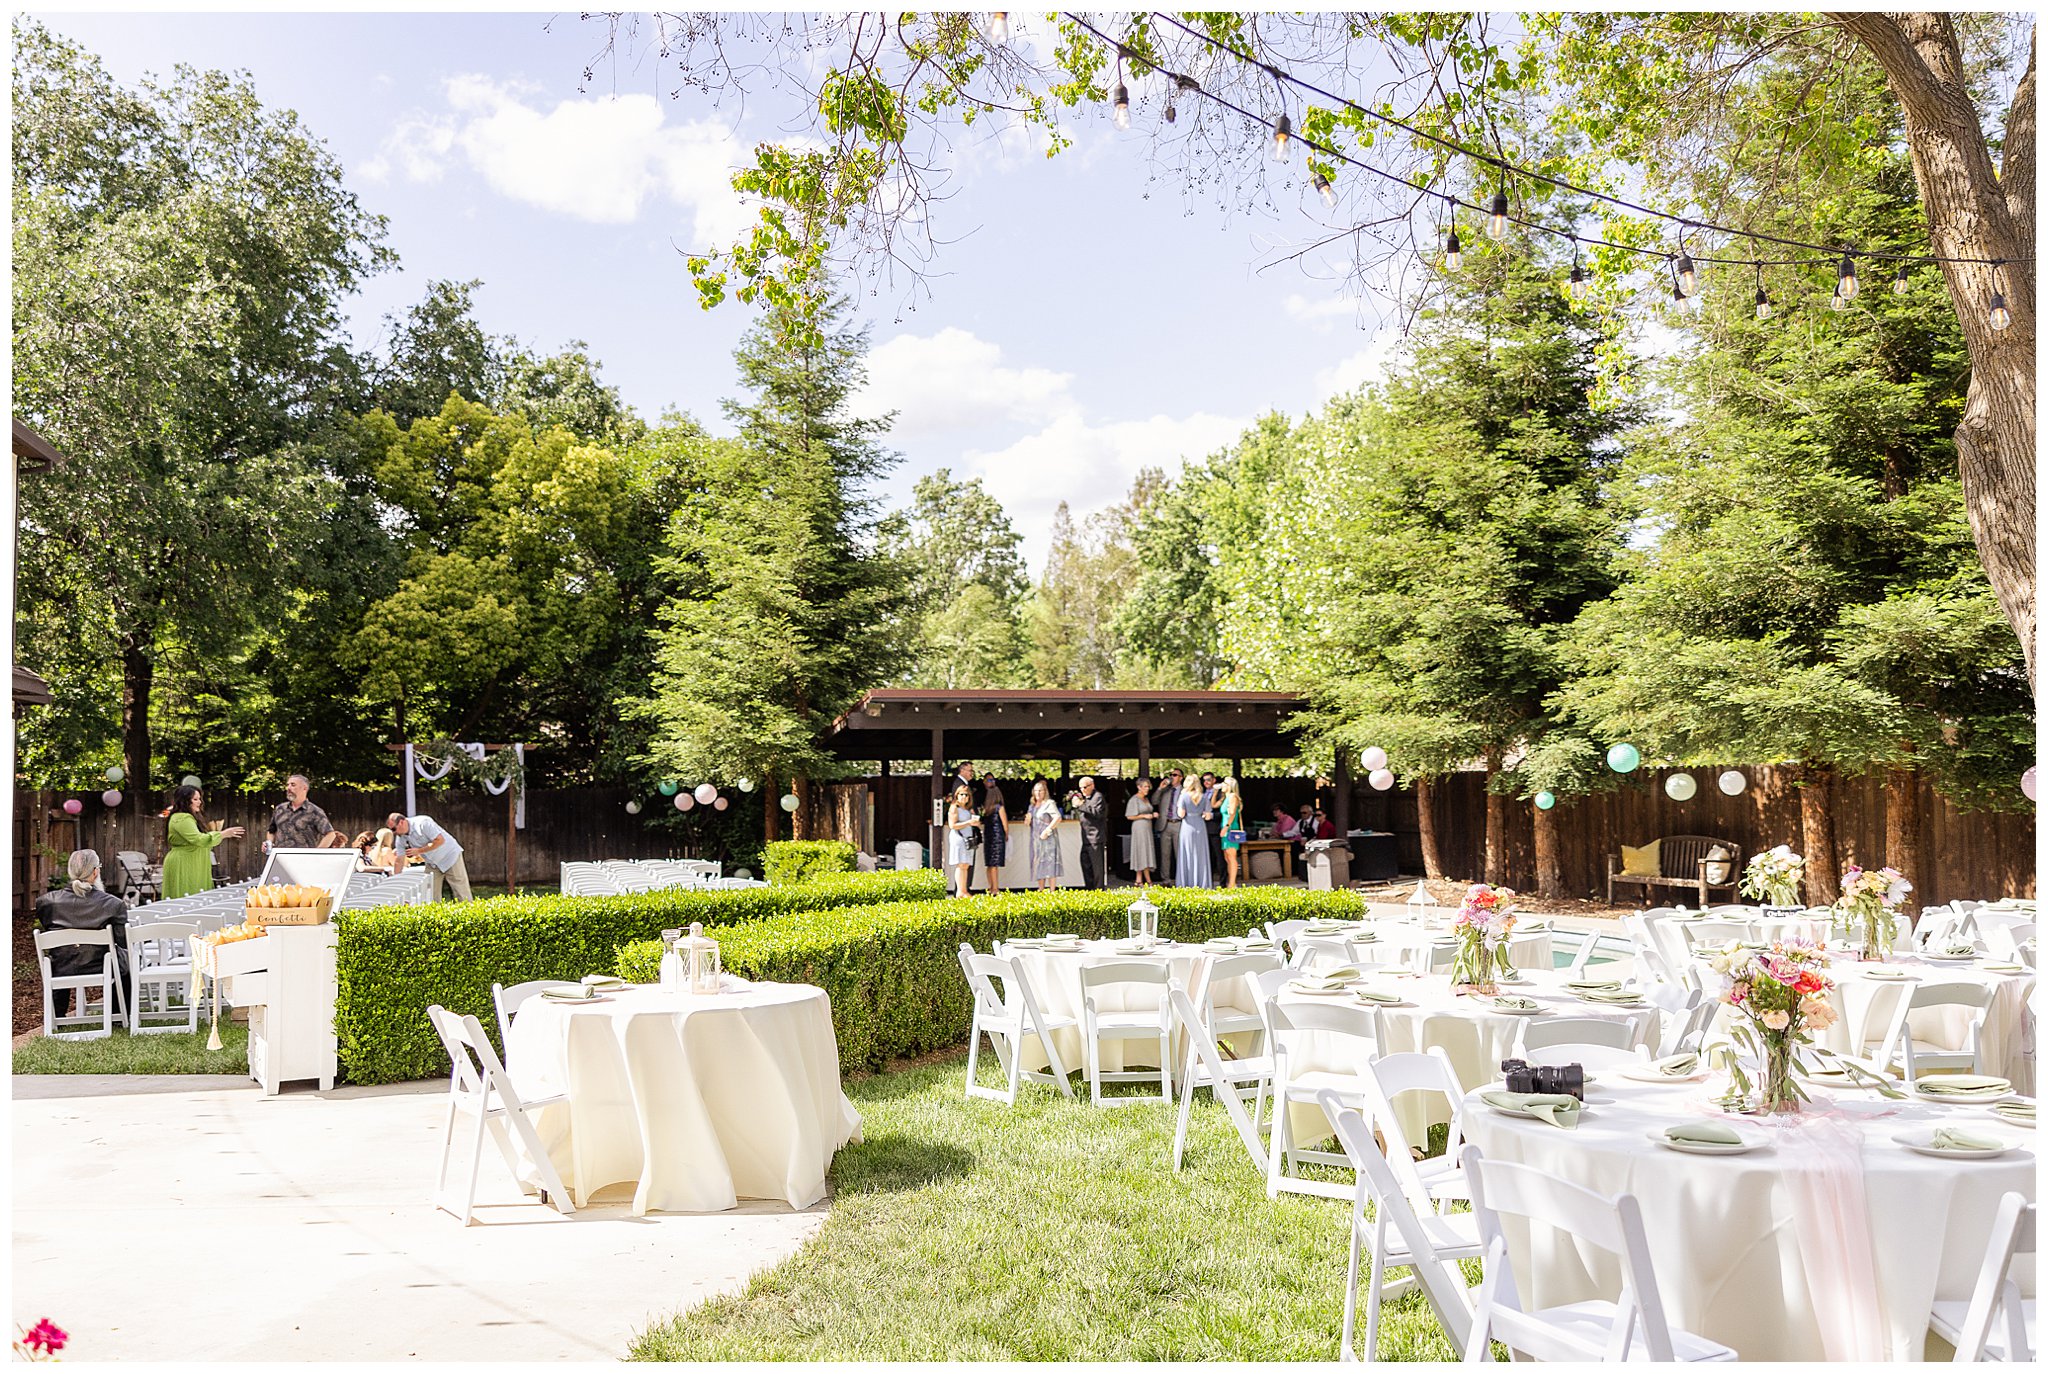 Backyard Wedding Chico CA First Look Bidwell Park Muted Pastel New Orleans Theme,